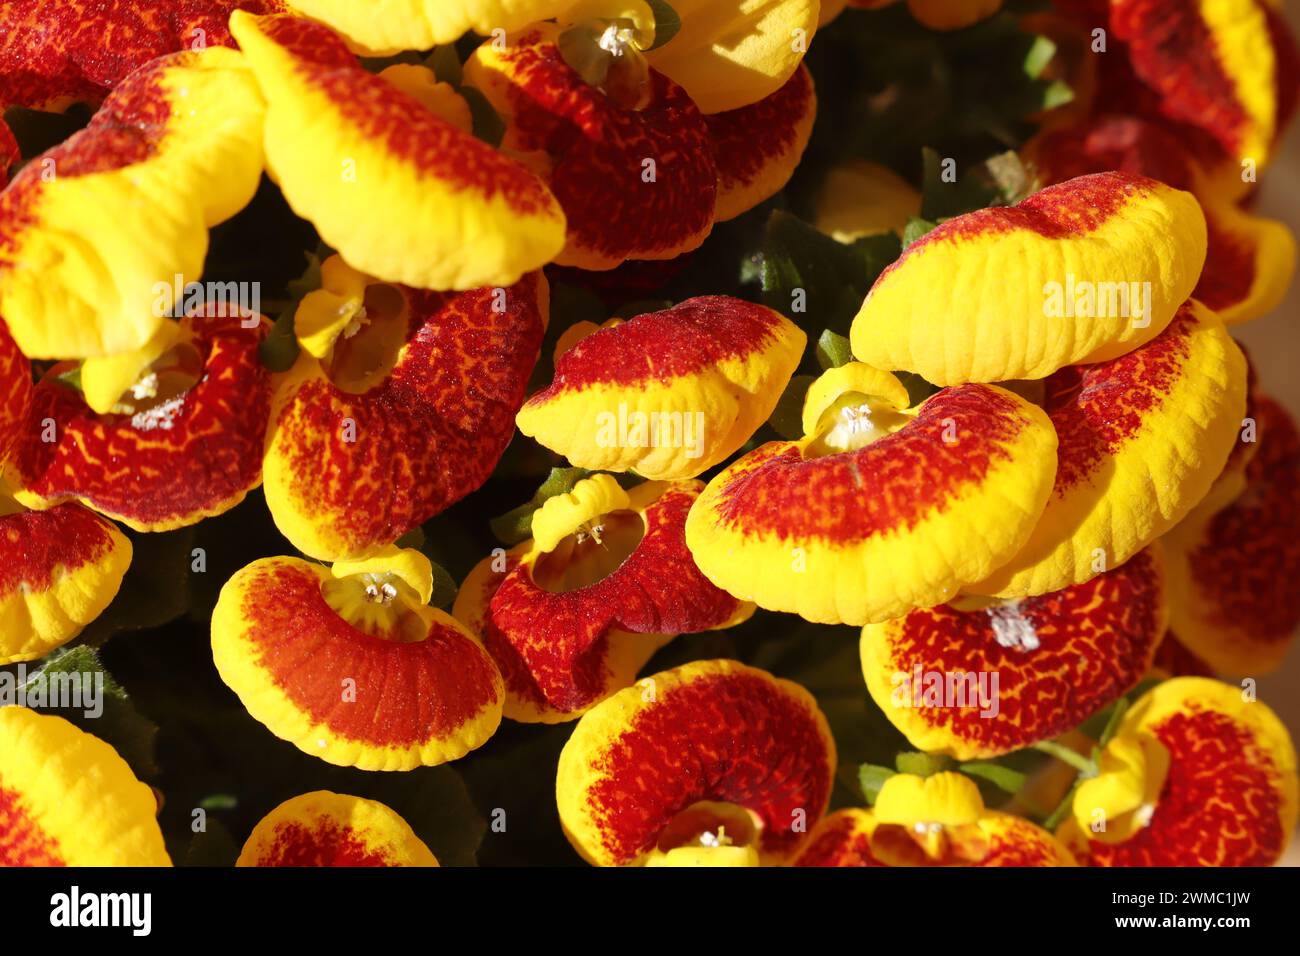 Calceolaria a plant full with yellow red flowers Stock Photo